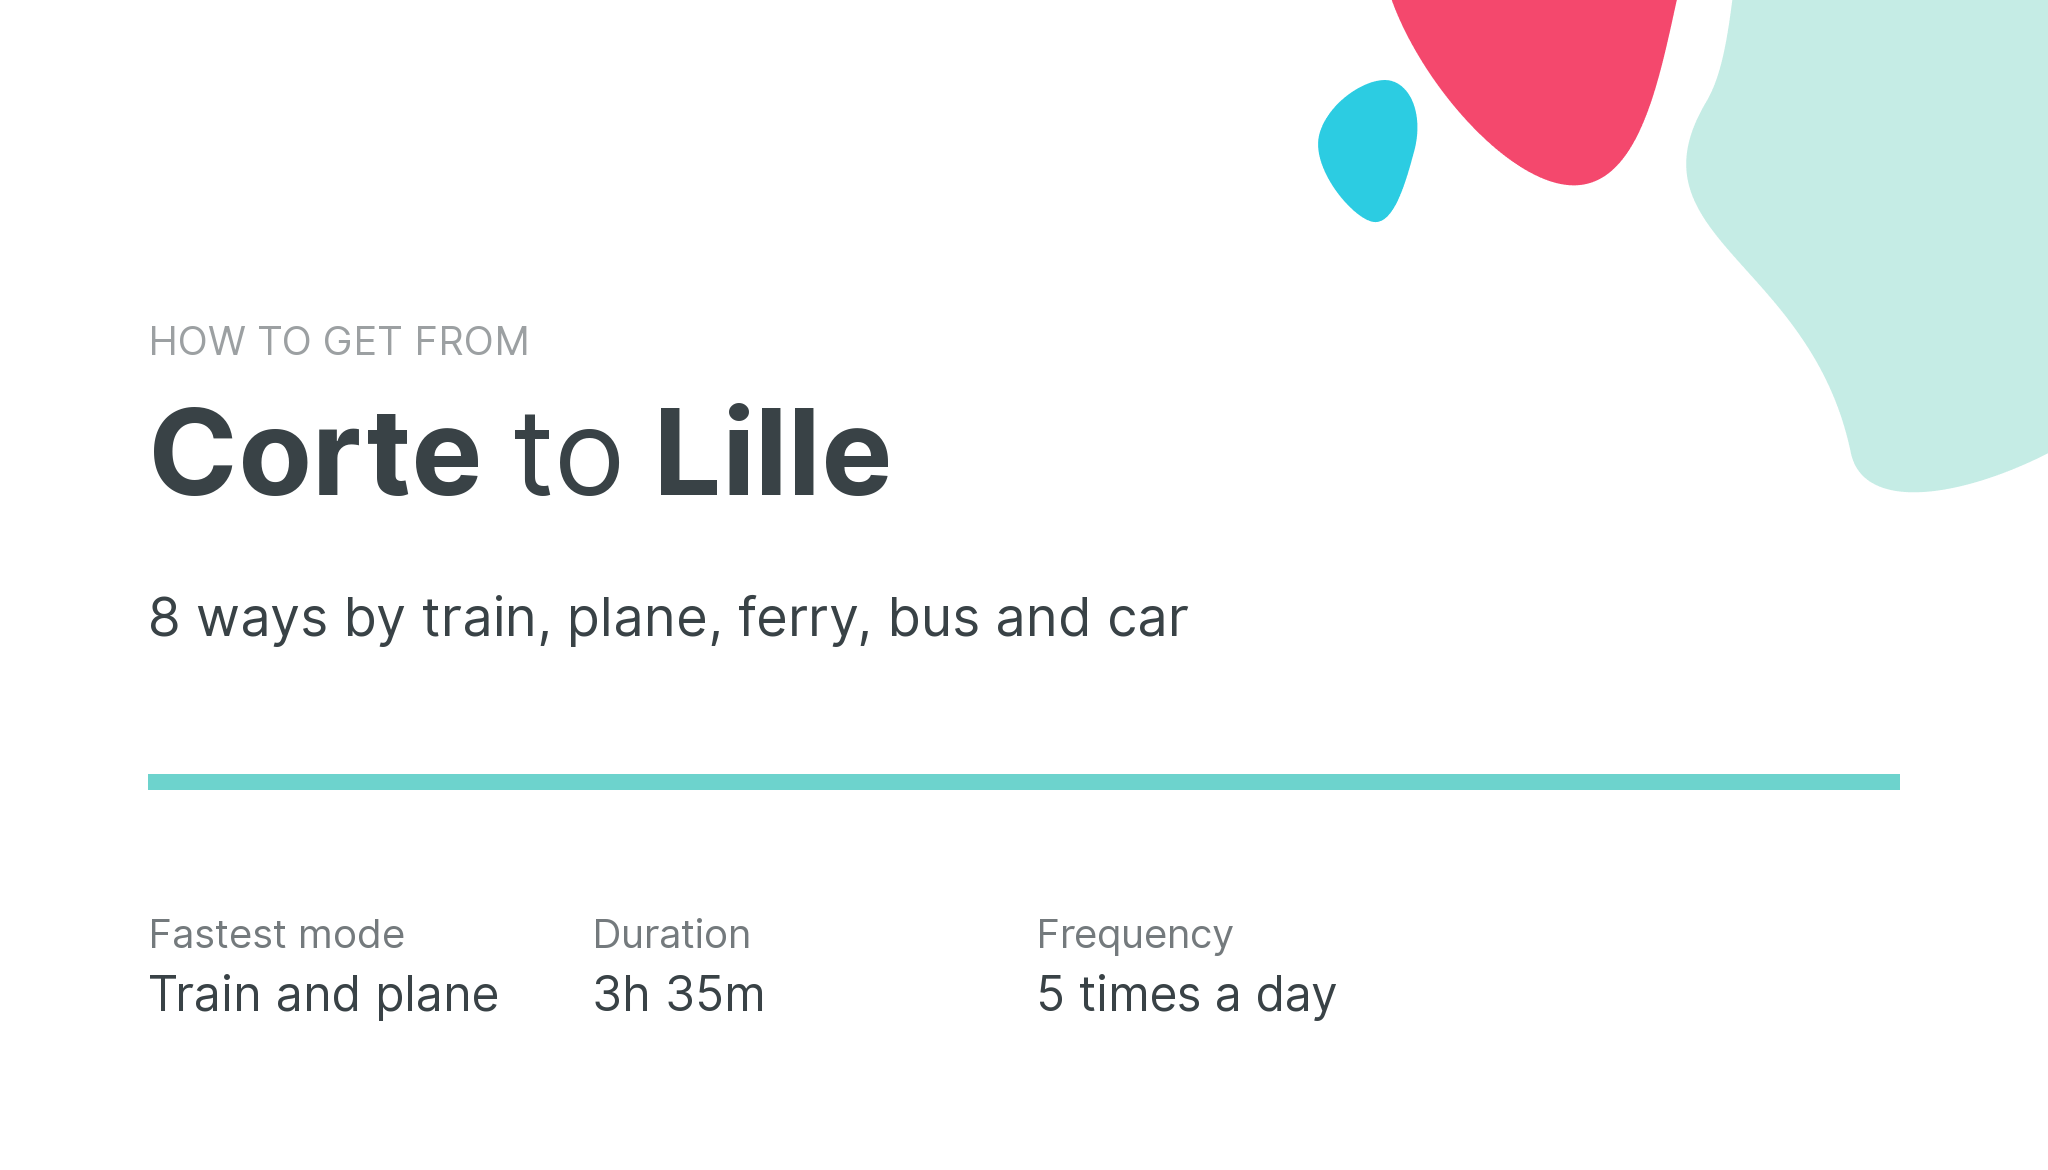 How do I get from Corte to Lille